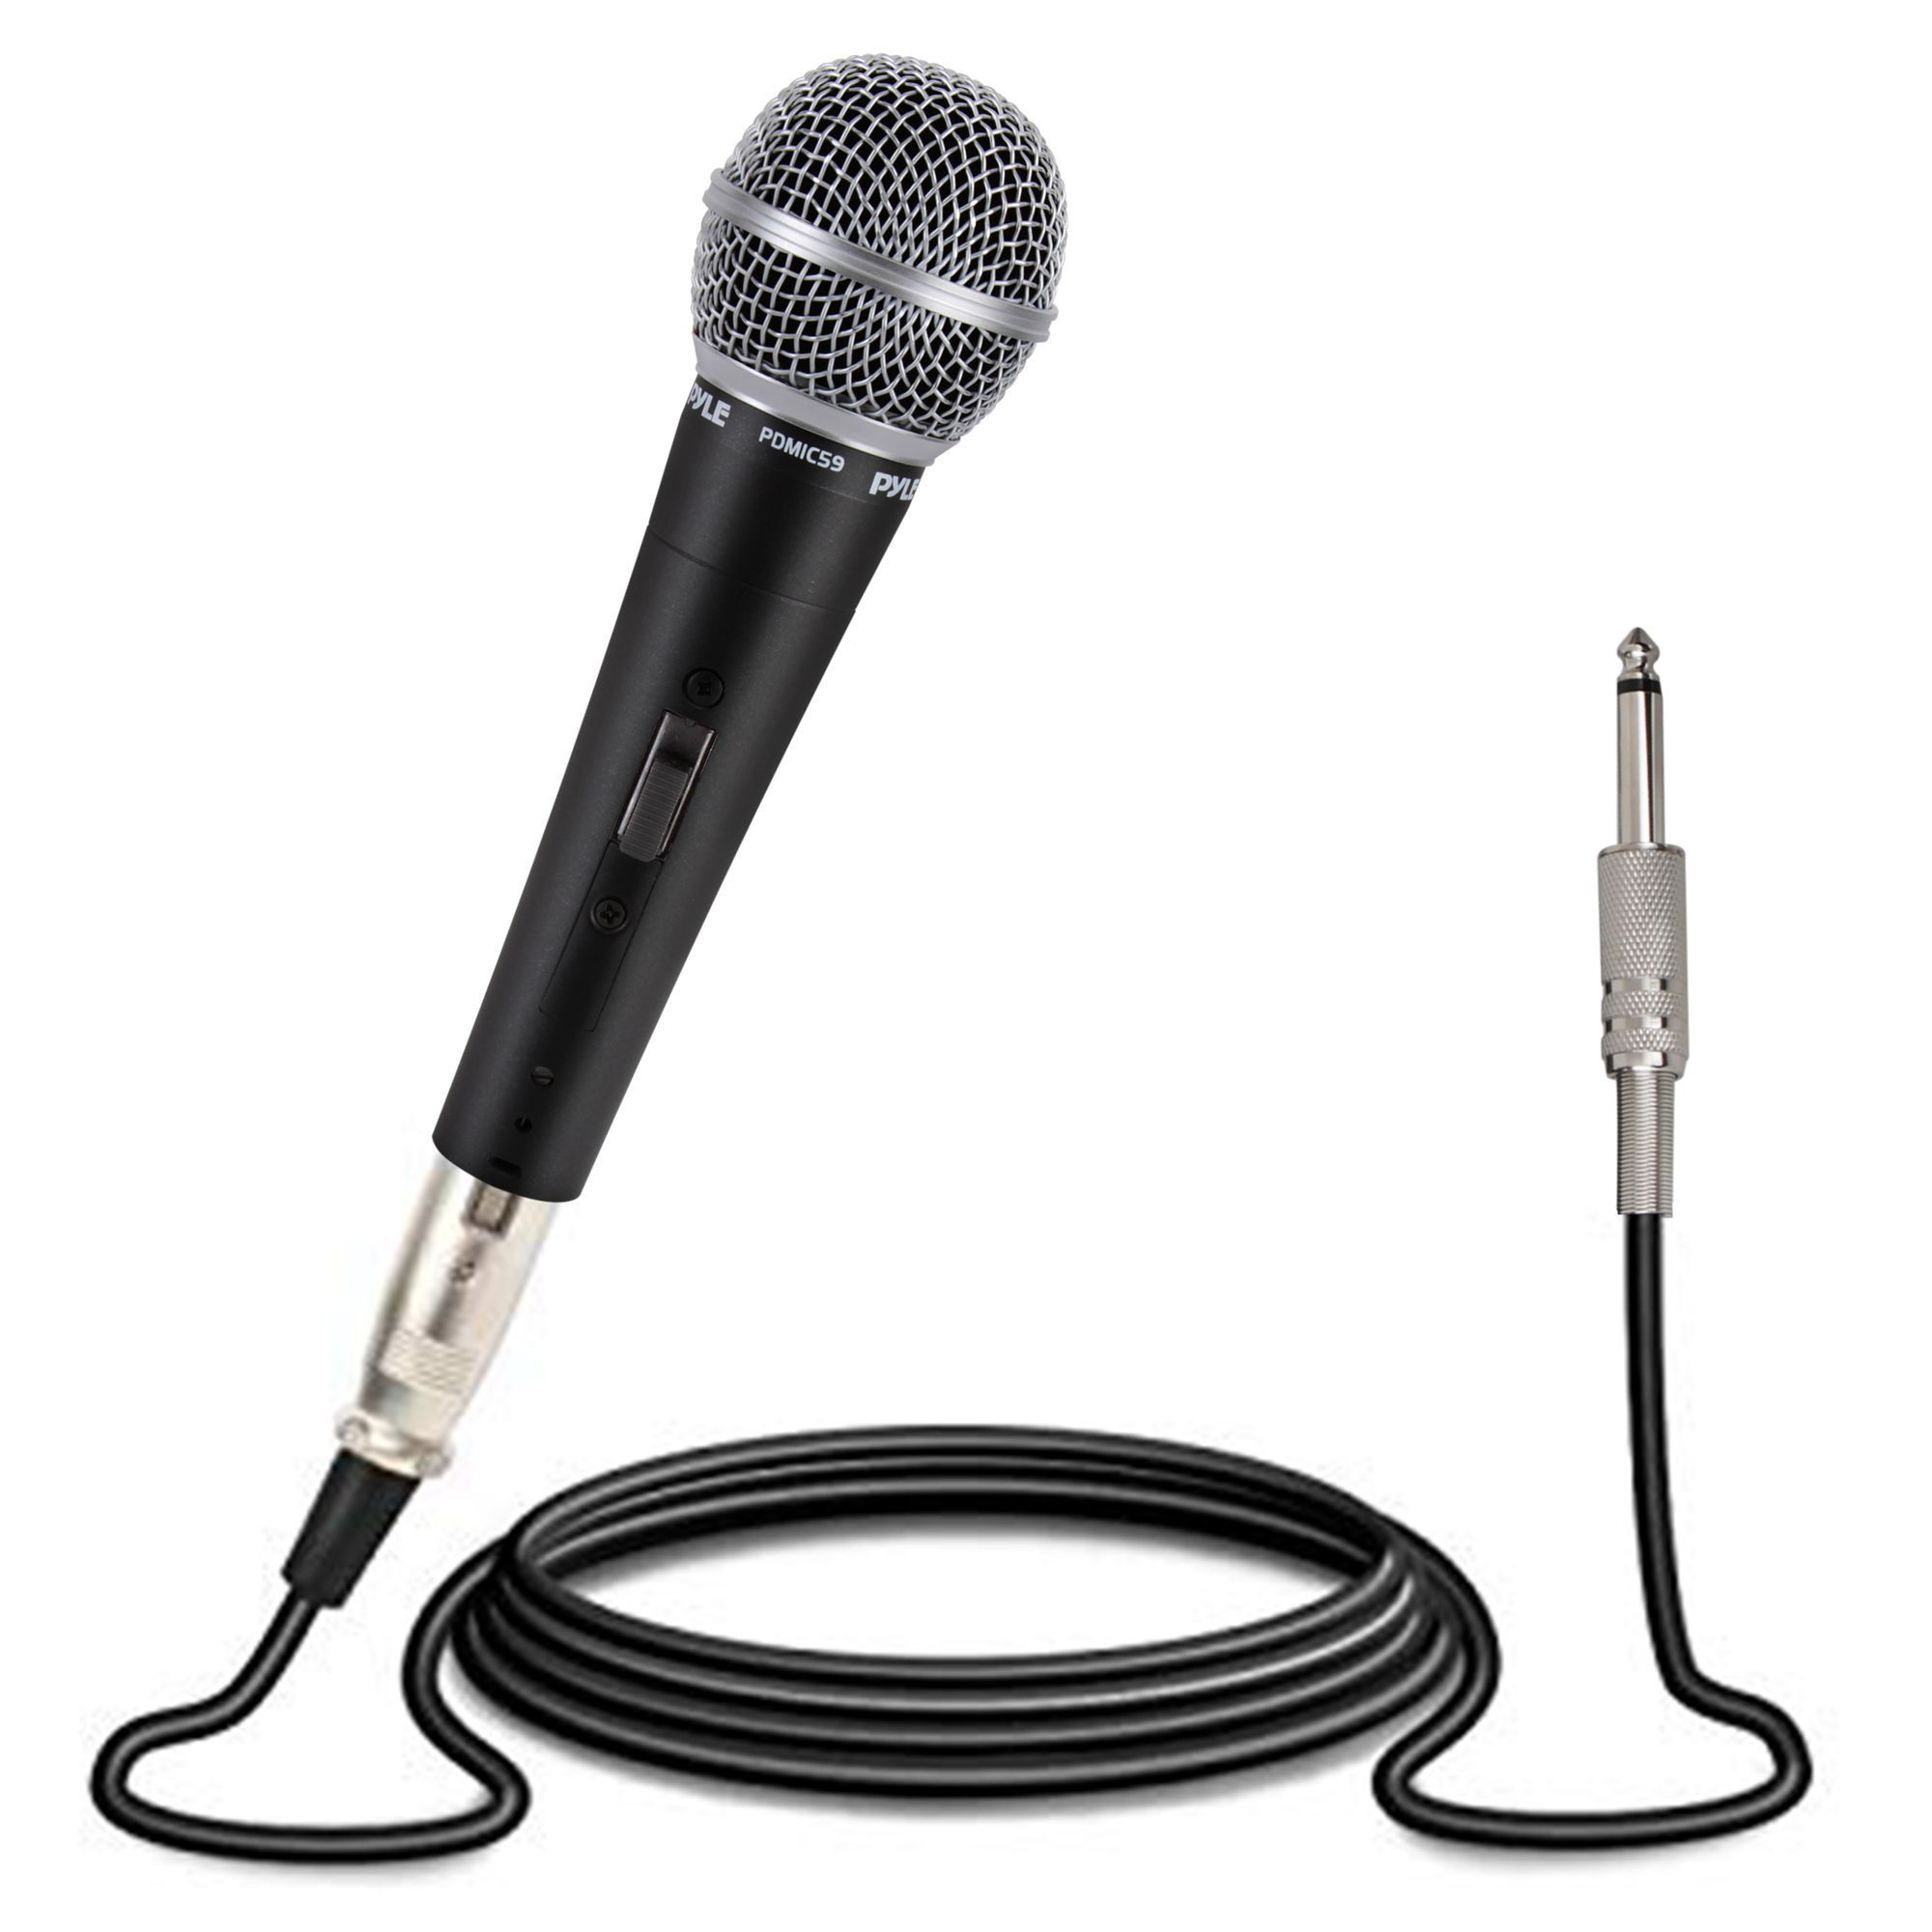 Pyle Professional Microphone, Ultra Wide Frequency Response, Unidirectional Handheld Mic, ON/OFF Switch (PDMIC59)